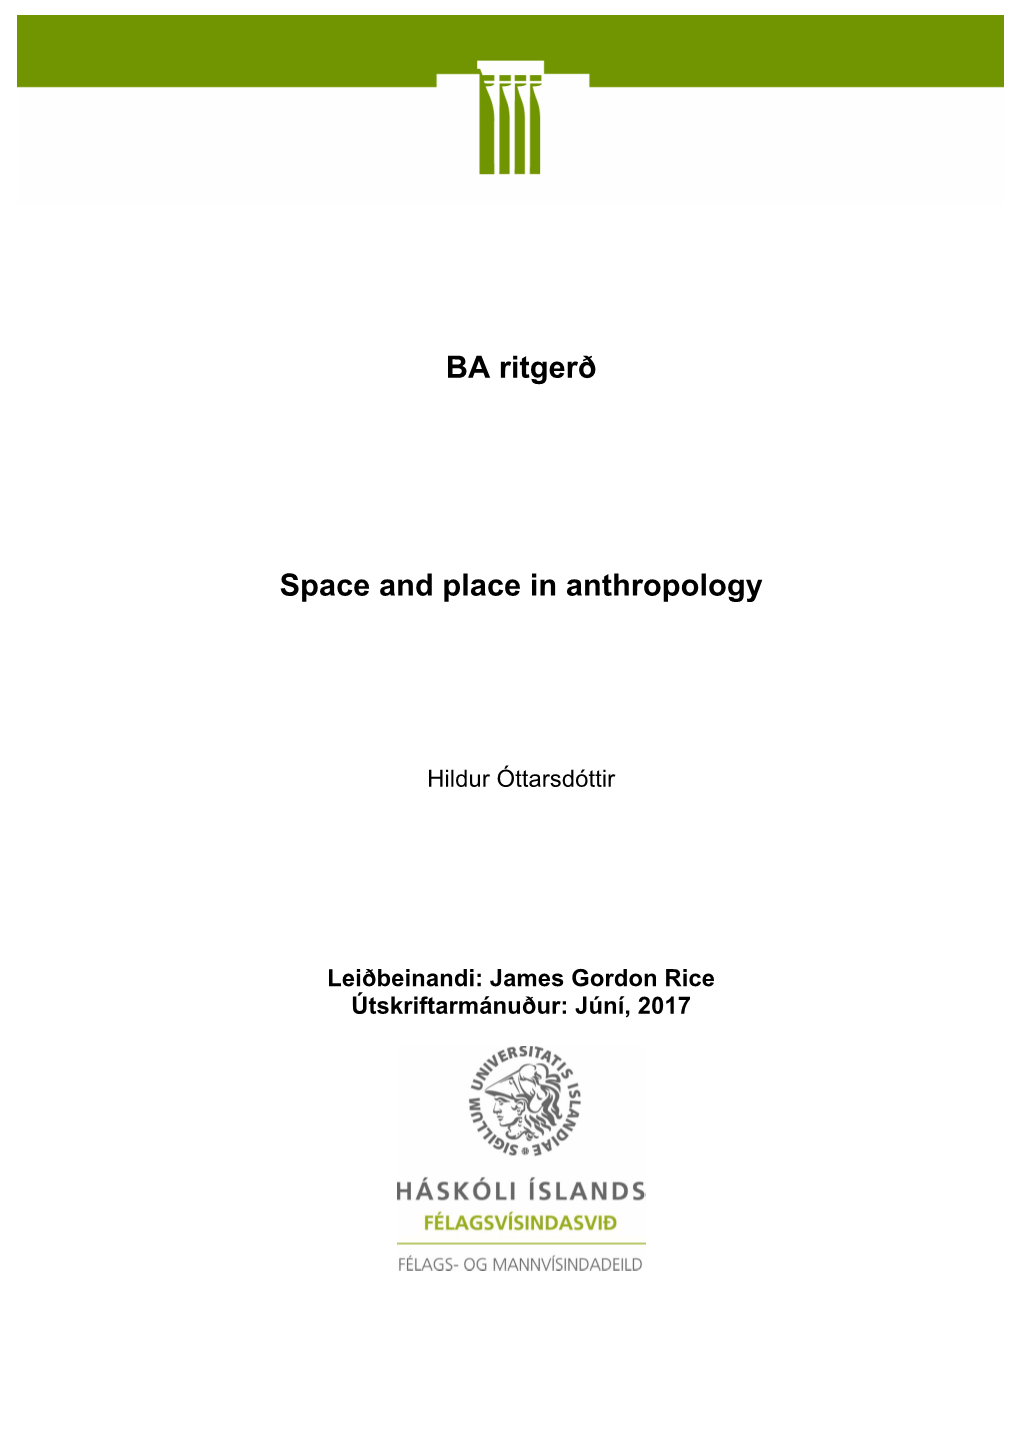 BA Ritgerð Space and Place in Anthropology